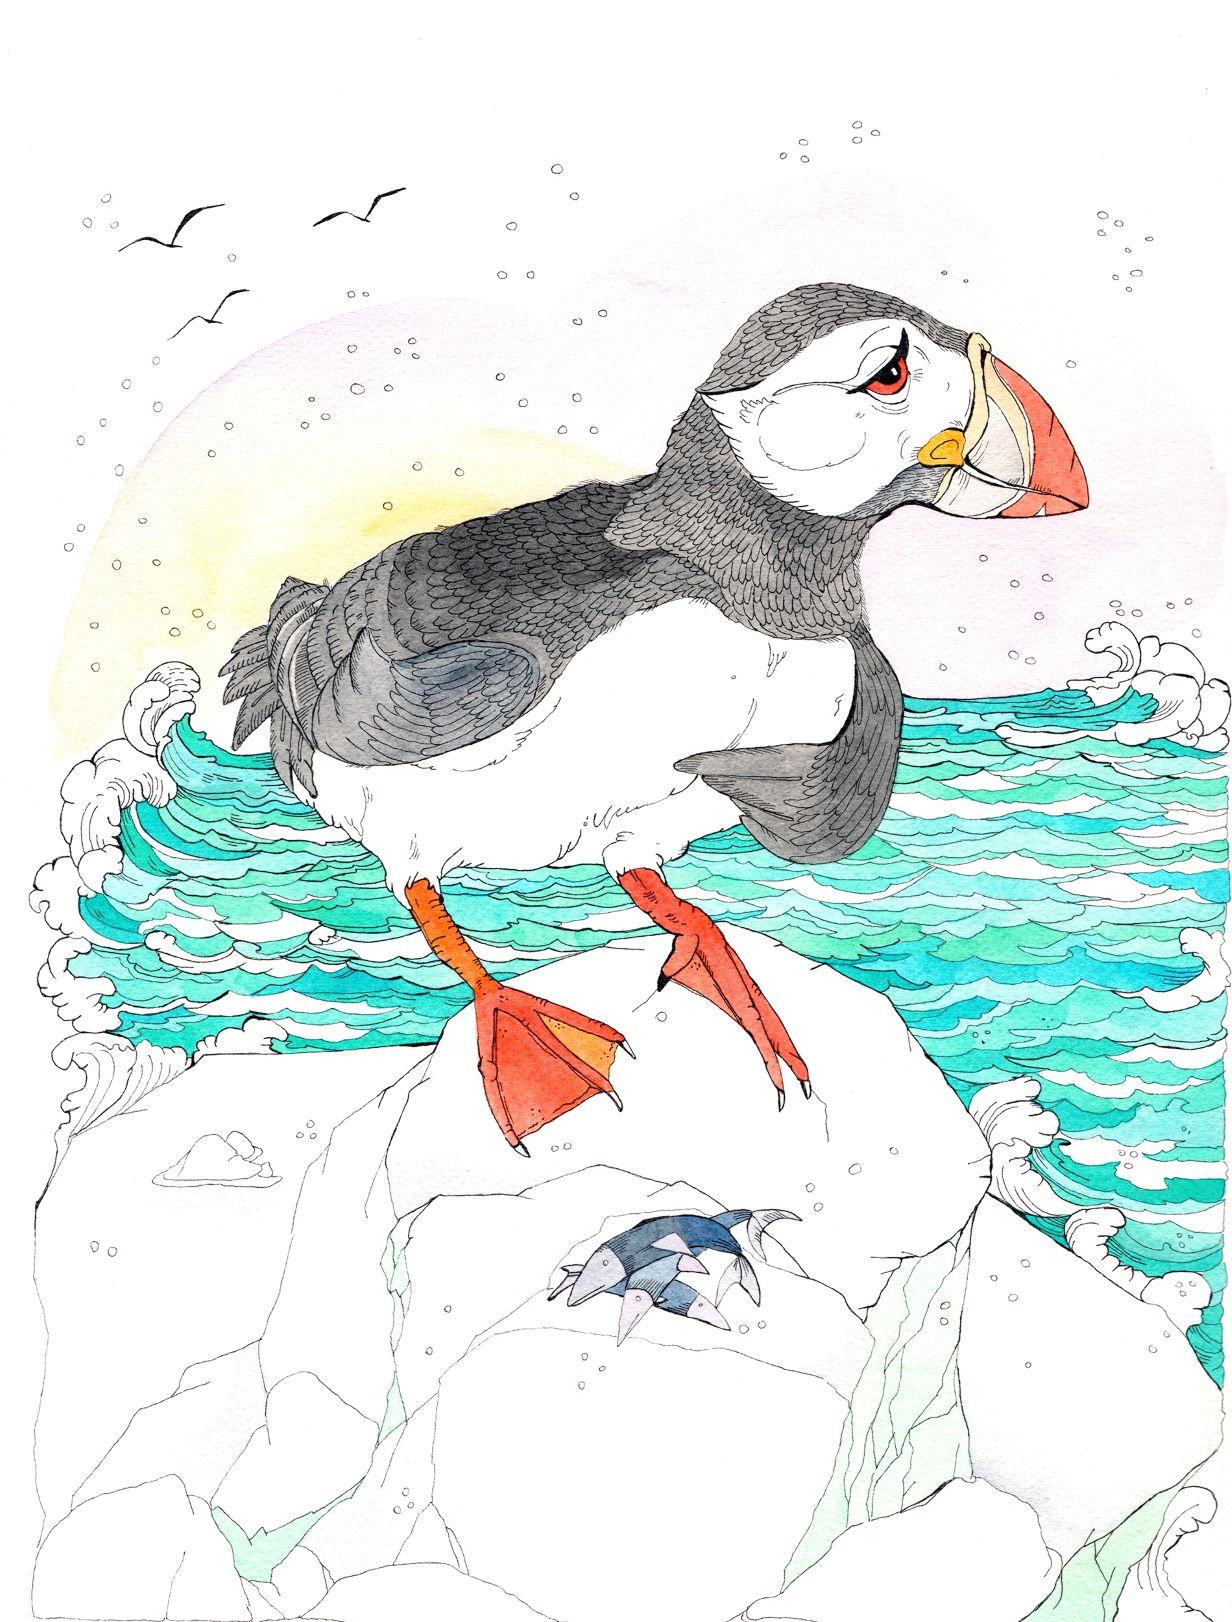 "Poppy the Puffin" Watercolor and Ink Children's Book illustration for the Book "Paisley the Polar Bear" by Kinga Martin